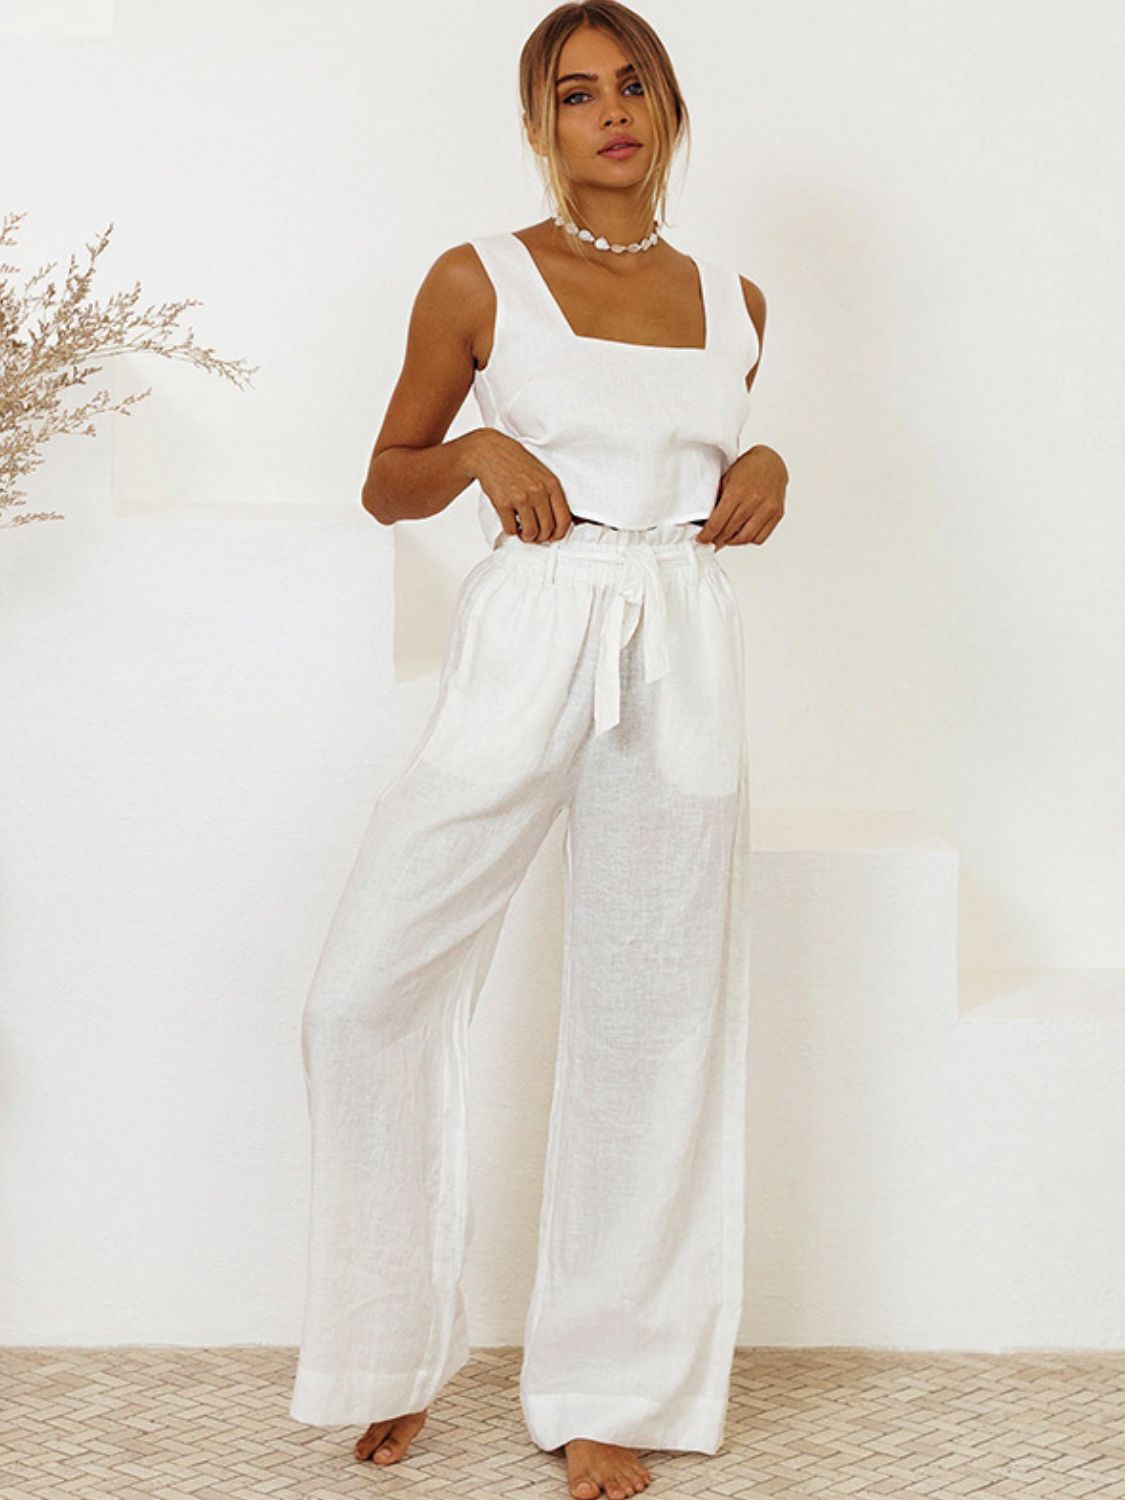 Square Neck Sleeveless Top and Pants Set